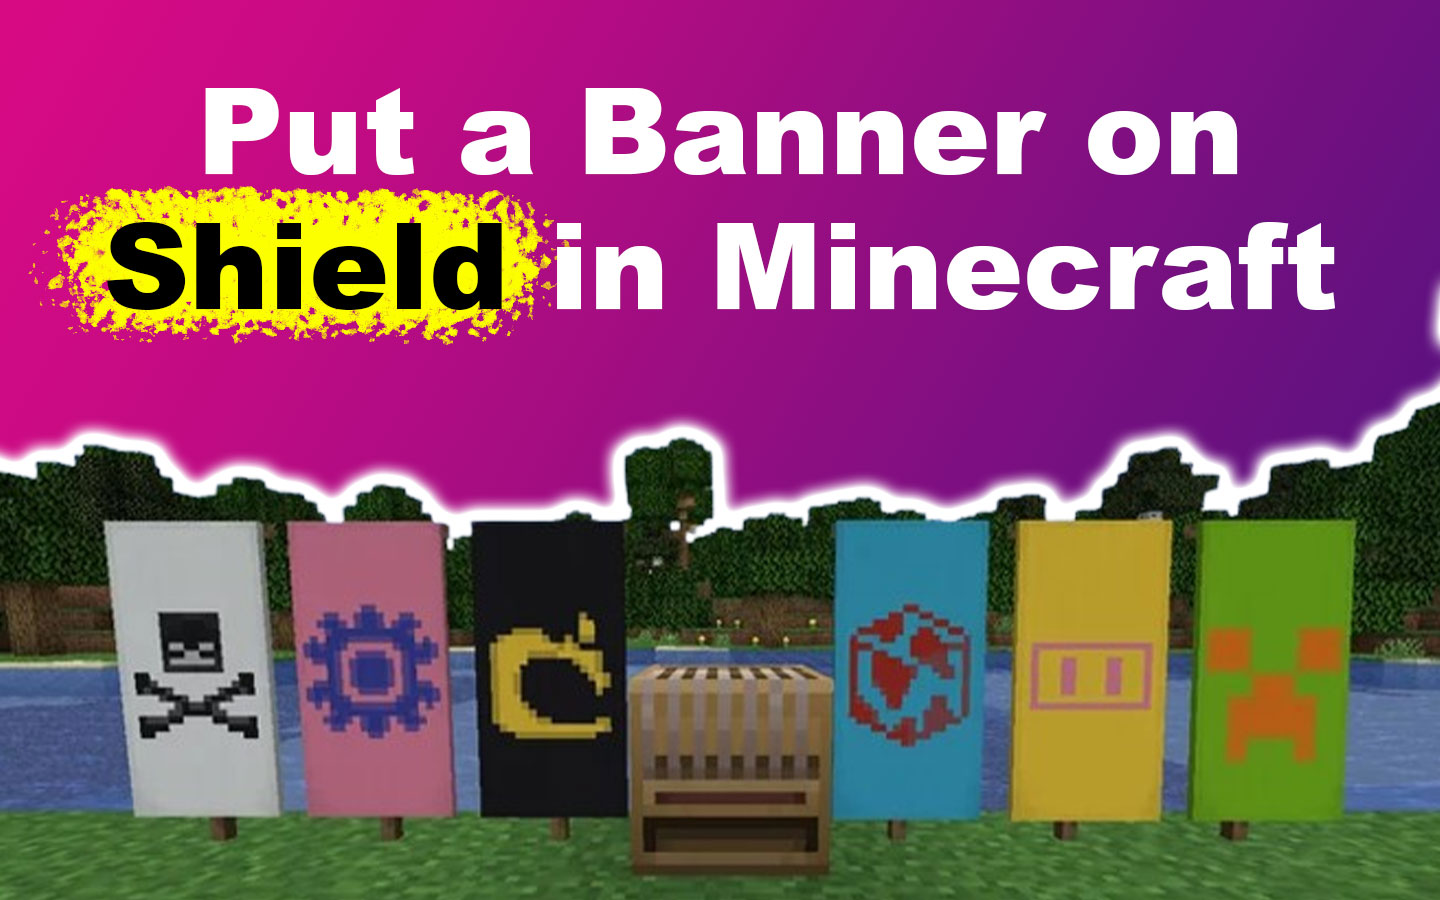 How to Put a Banner on a Shield